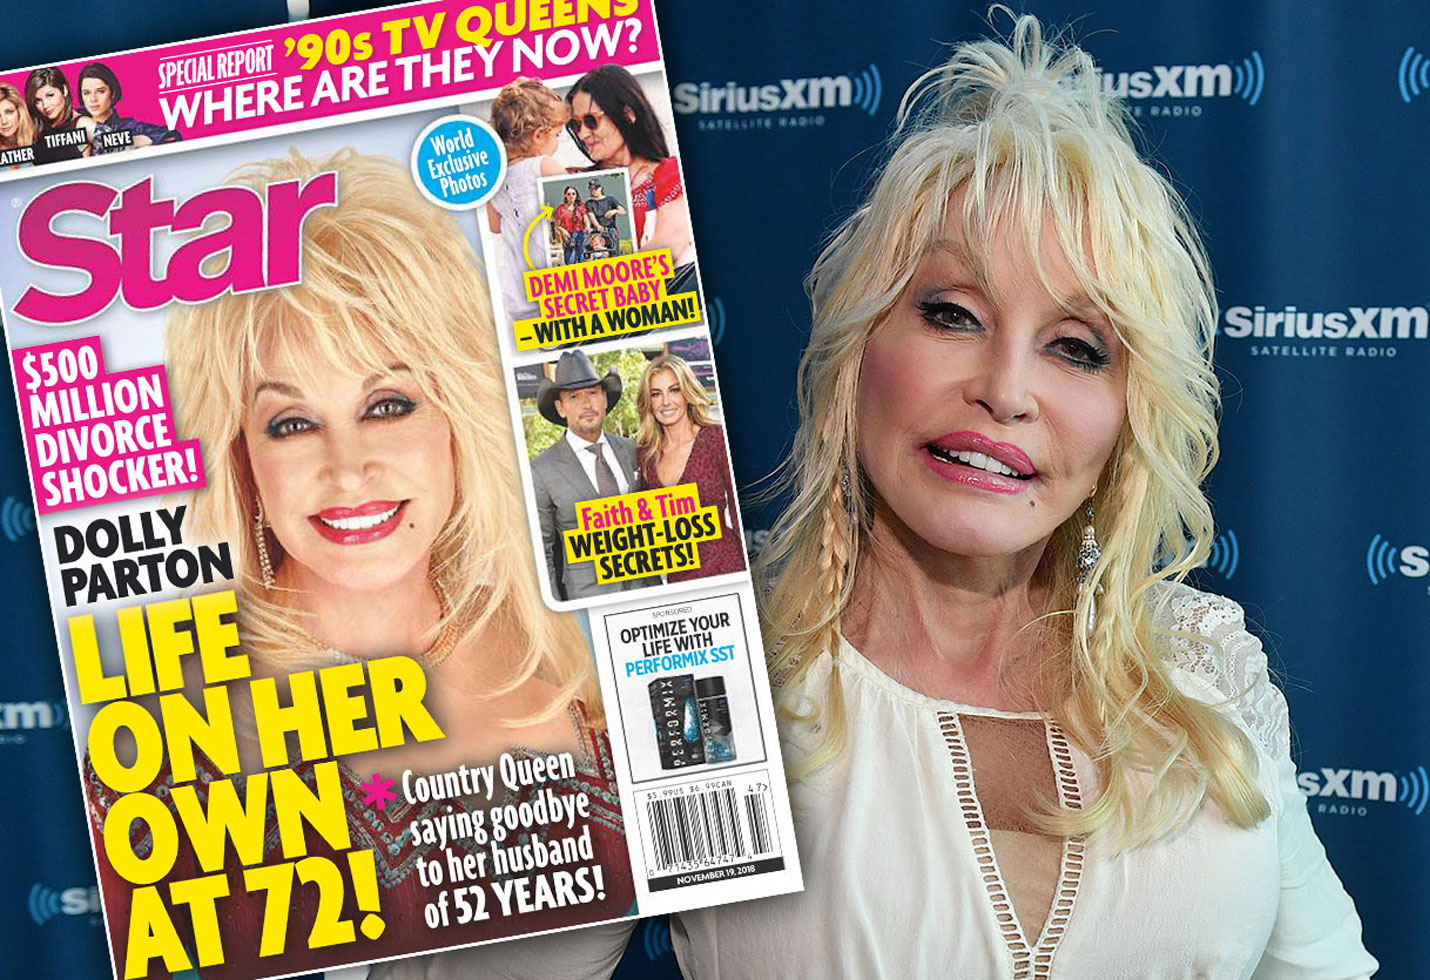 Dolly Parton's Life On Her Own At 72 — Where's Her Husband?1430 x 980